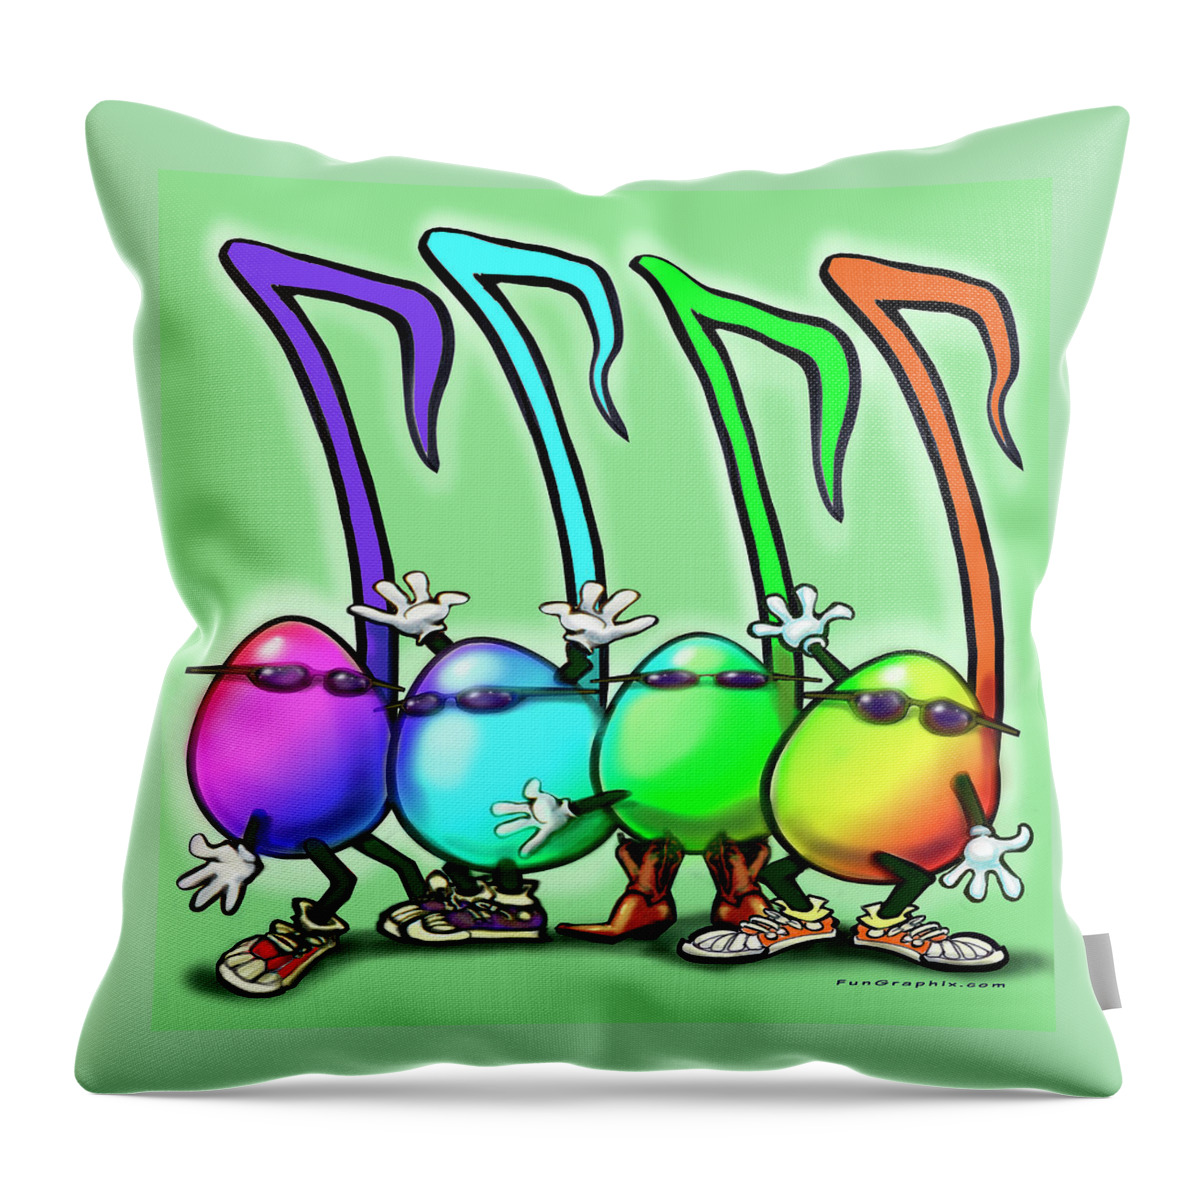 Music Throw Pillow featuring the digital art Music Notes Party by Kevin Middleton